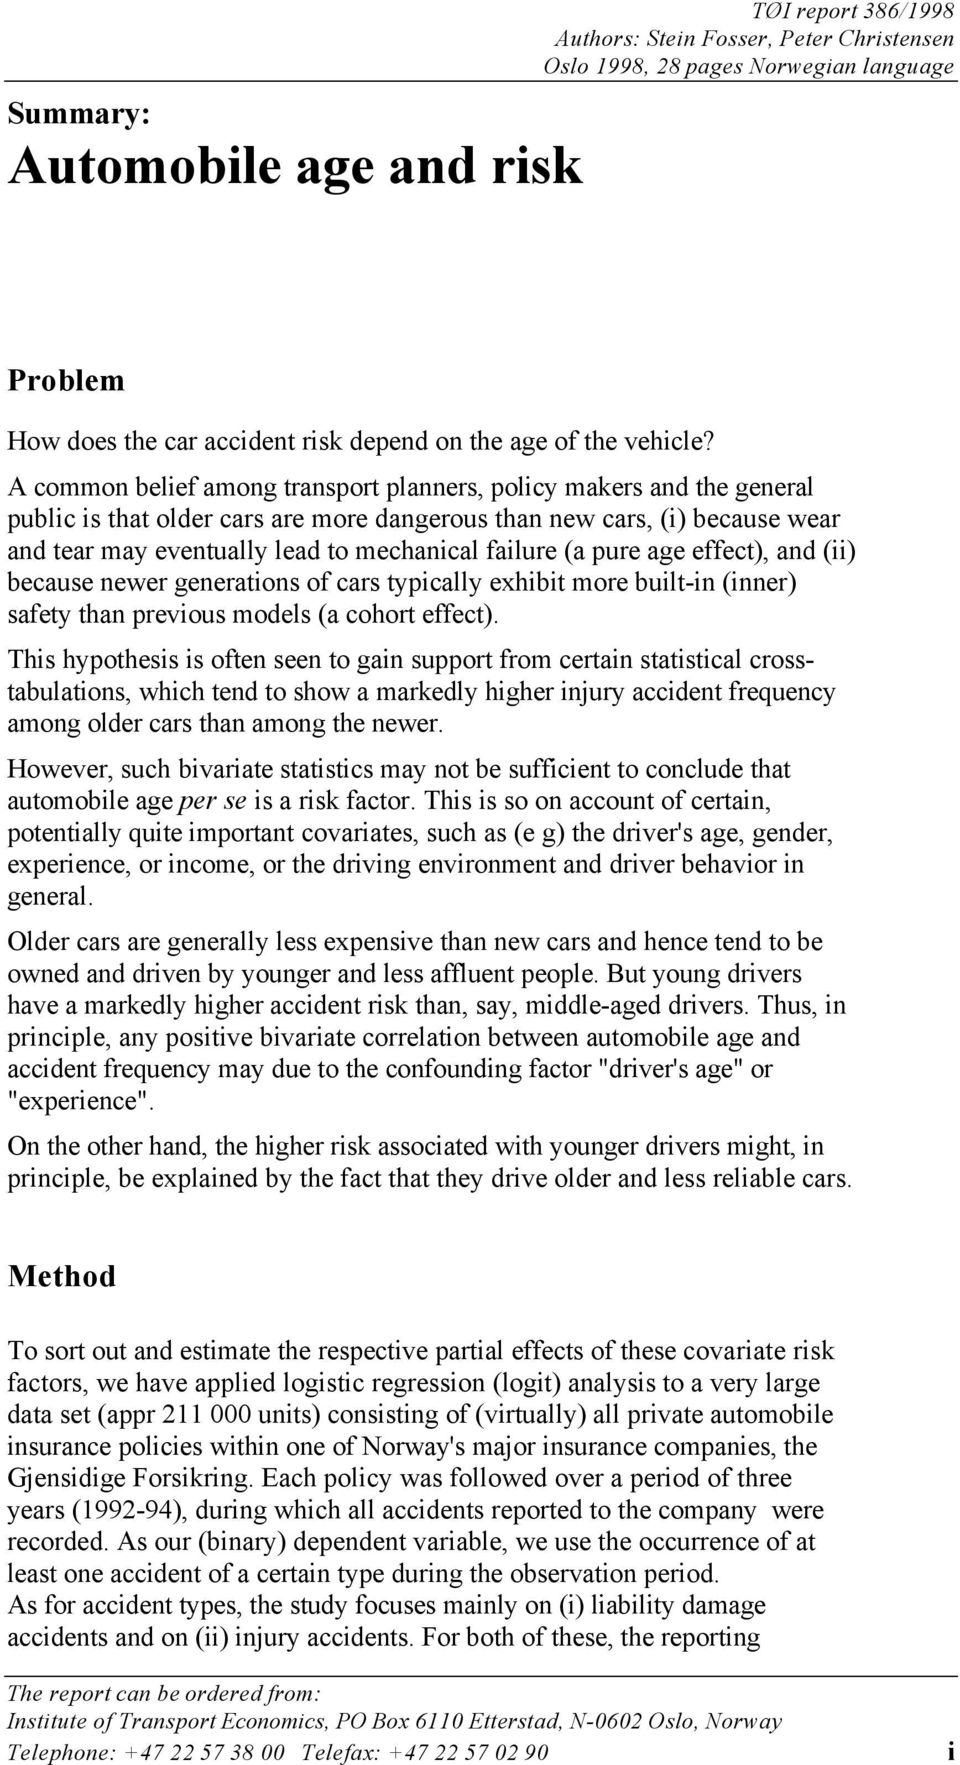 A common belief among transport planners, policy makers and the general public is that older cars are more dangerous than new cars, (i) because wear and tear may eventually lead to mechanical failure